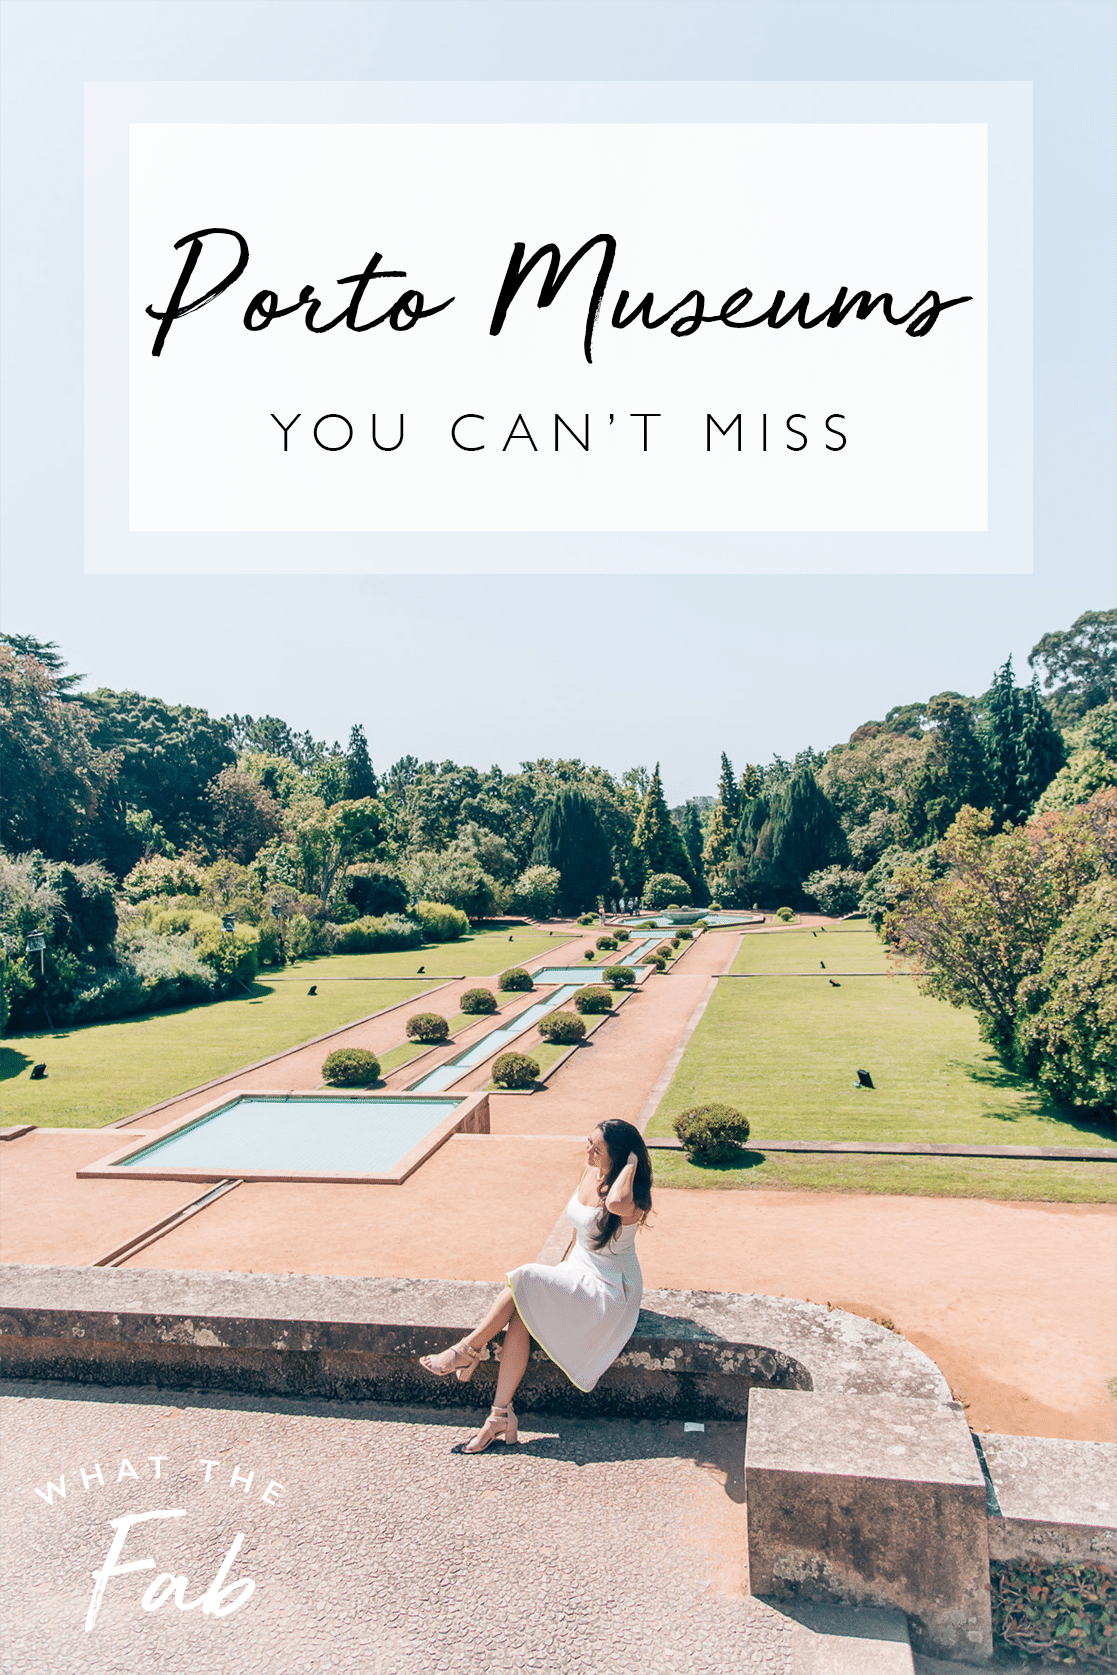 Porto Museums you can't miss, by Travel Blogger What The Fab